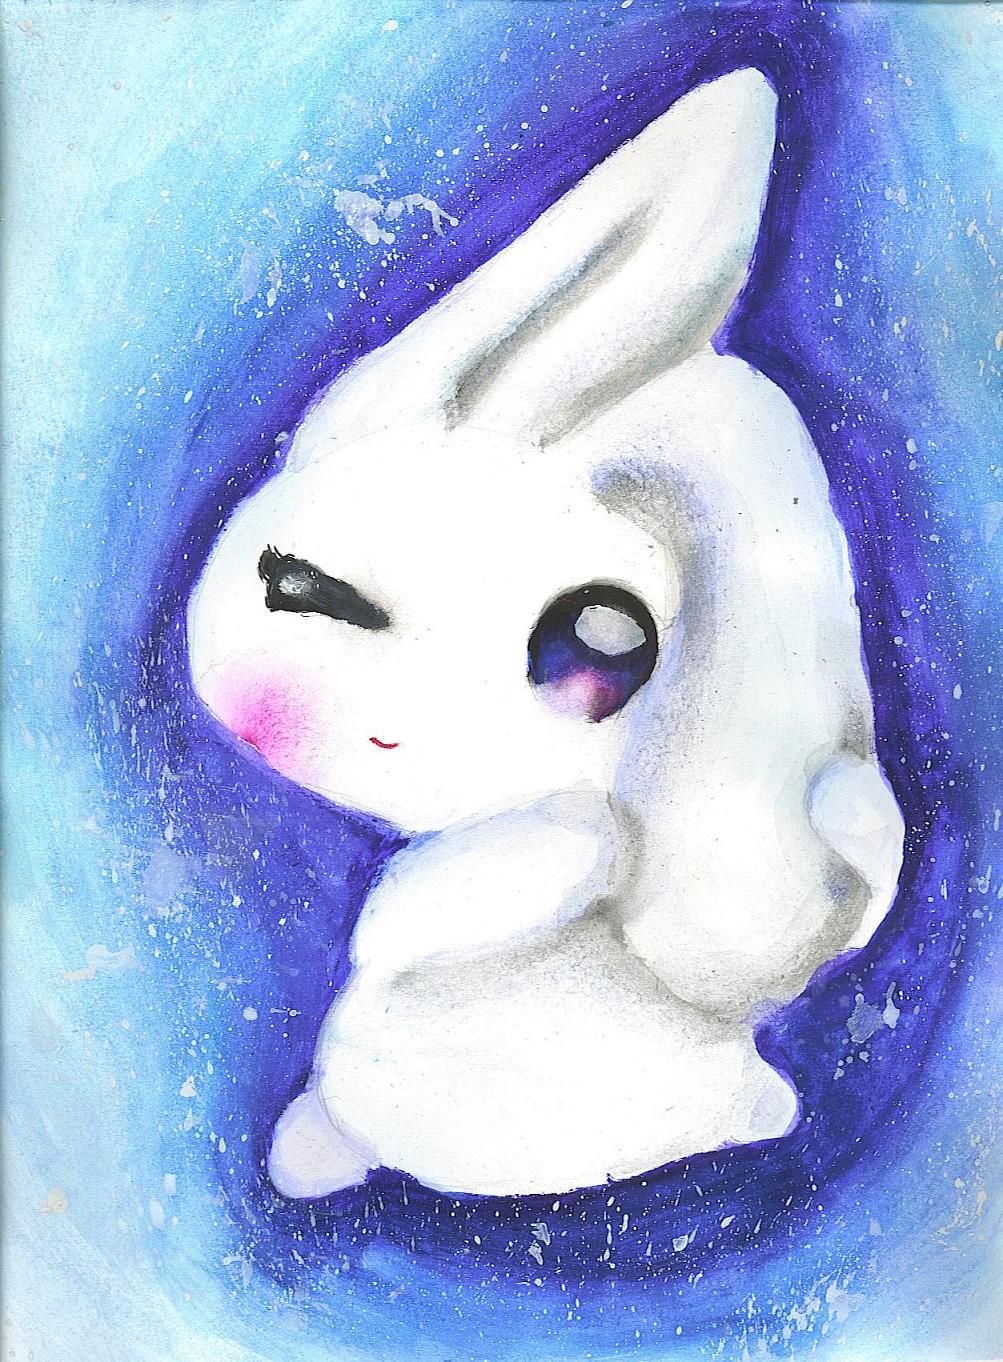 *Anime Bunny by crazy-about-drawing